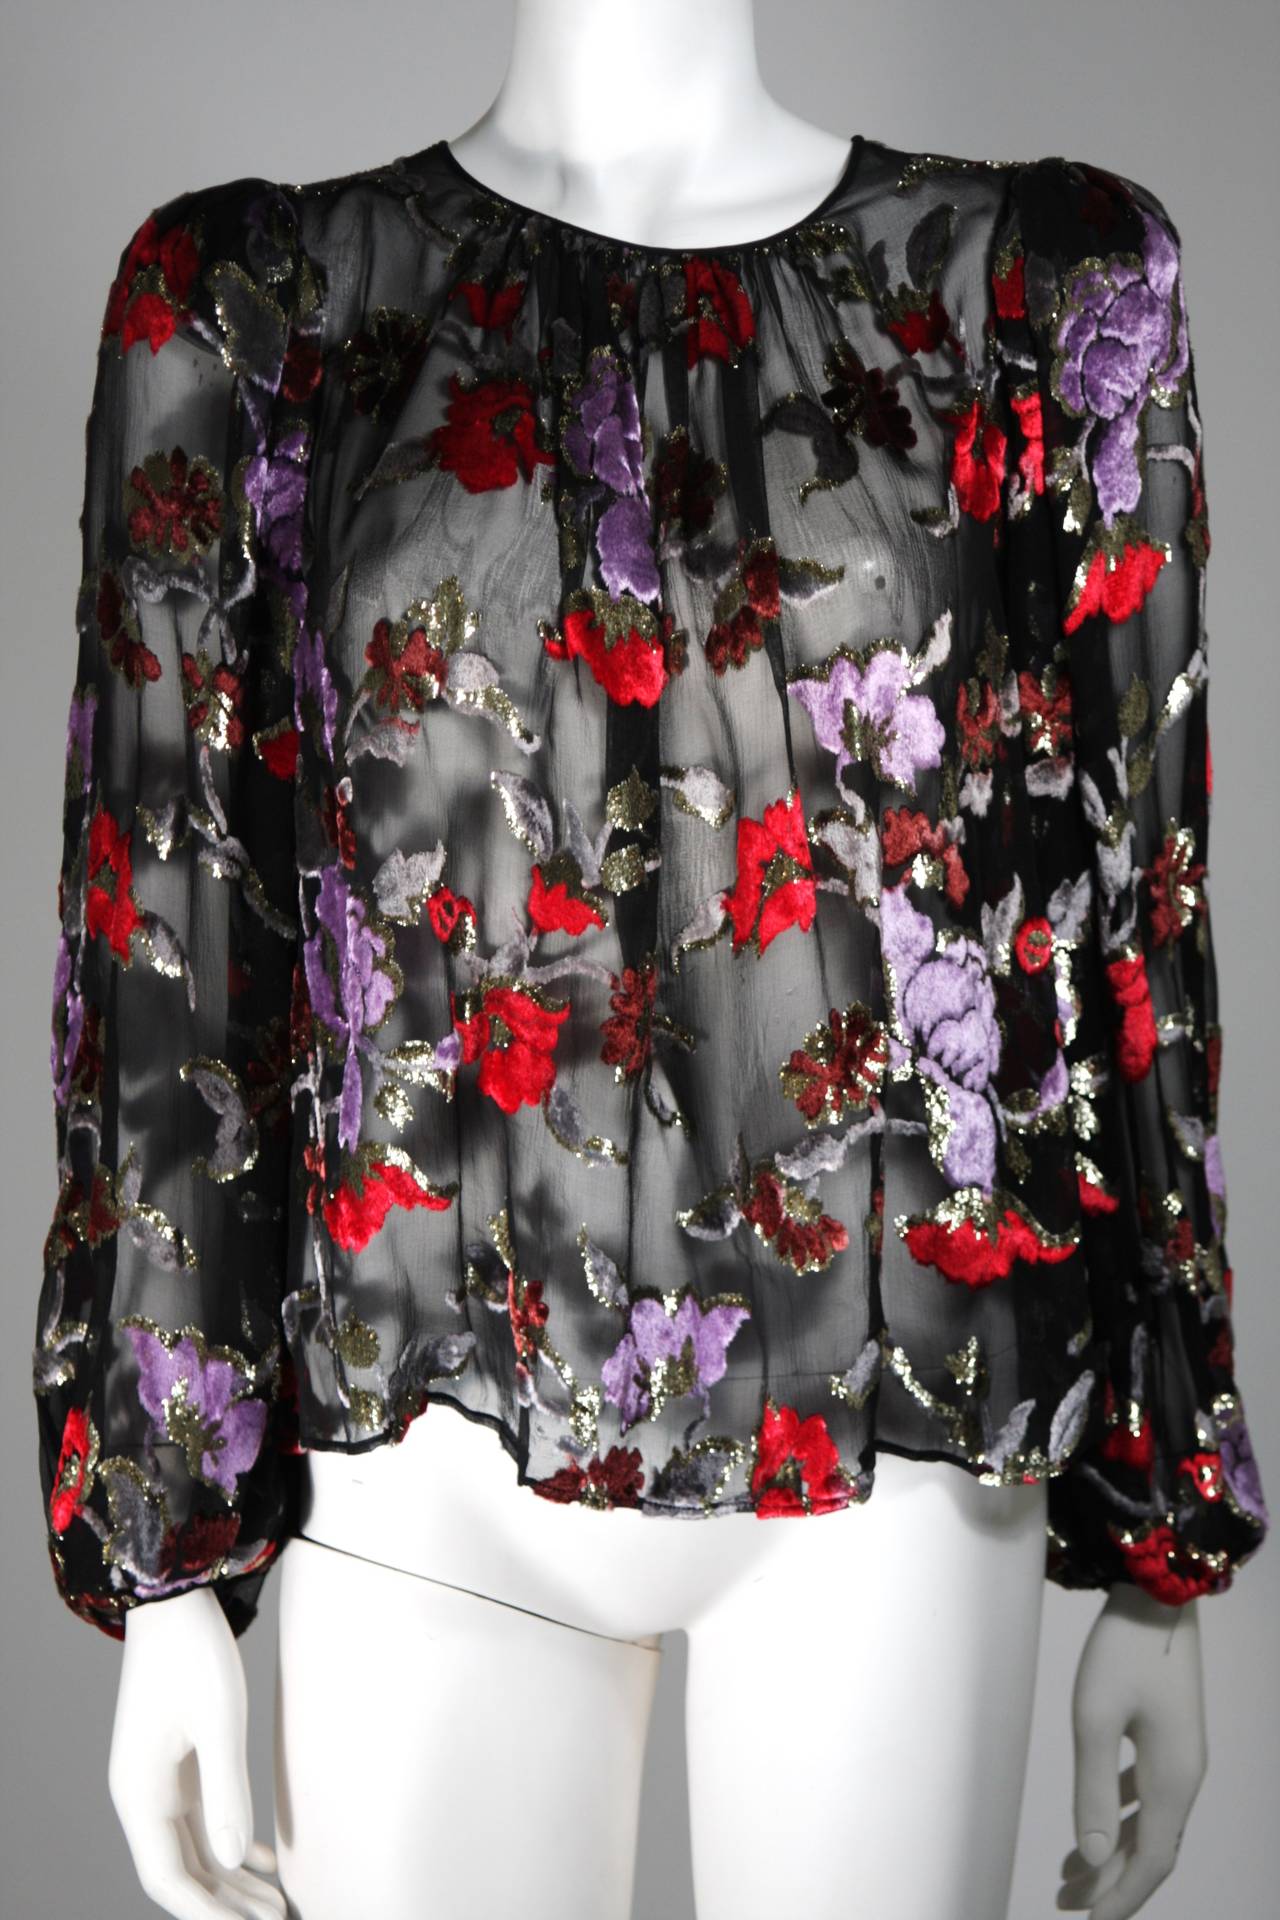 Gorgeous sheer black silk chiffon evening blouse by Oscar de la Renta with rich red and purple lurex flowers throughout. Lightly padded shoulders, flowing sleeves, with a fitted hidden hook and eye closure at the wrists. The blouse fastens at the